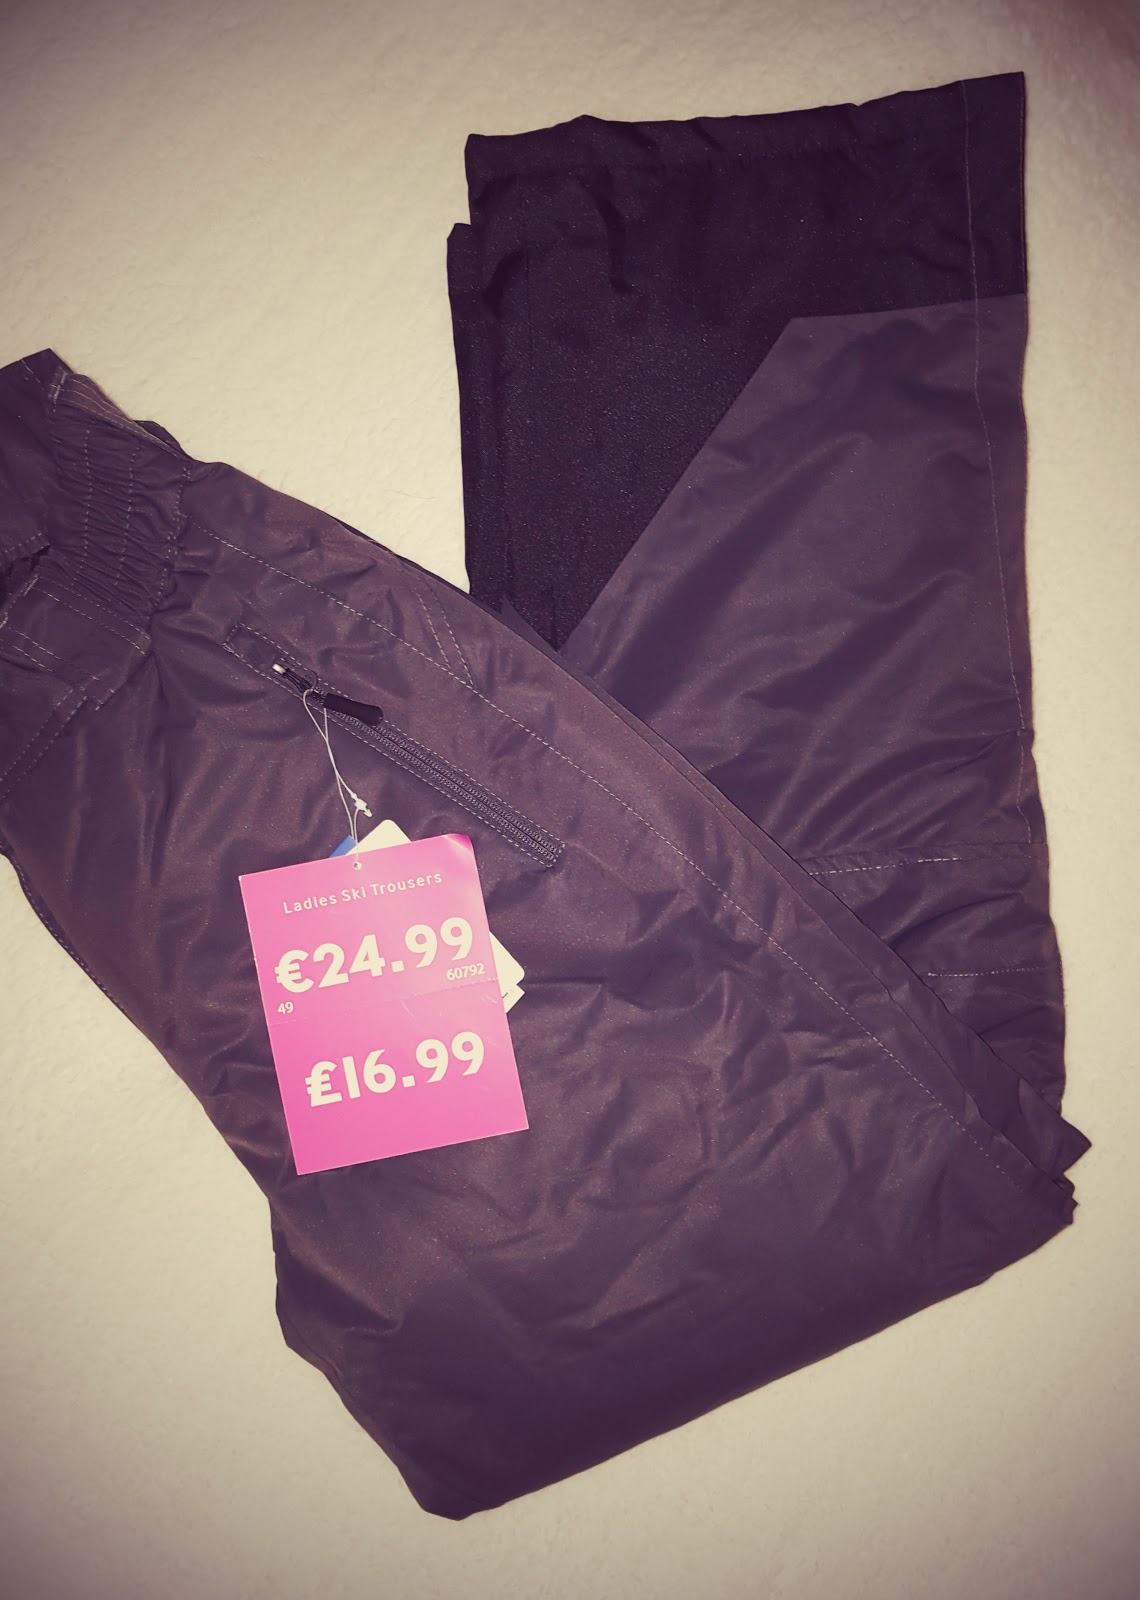 Looking For Skiing Fashion At Great Prices? Aldi Review